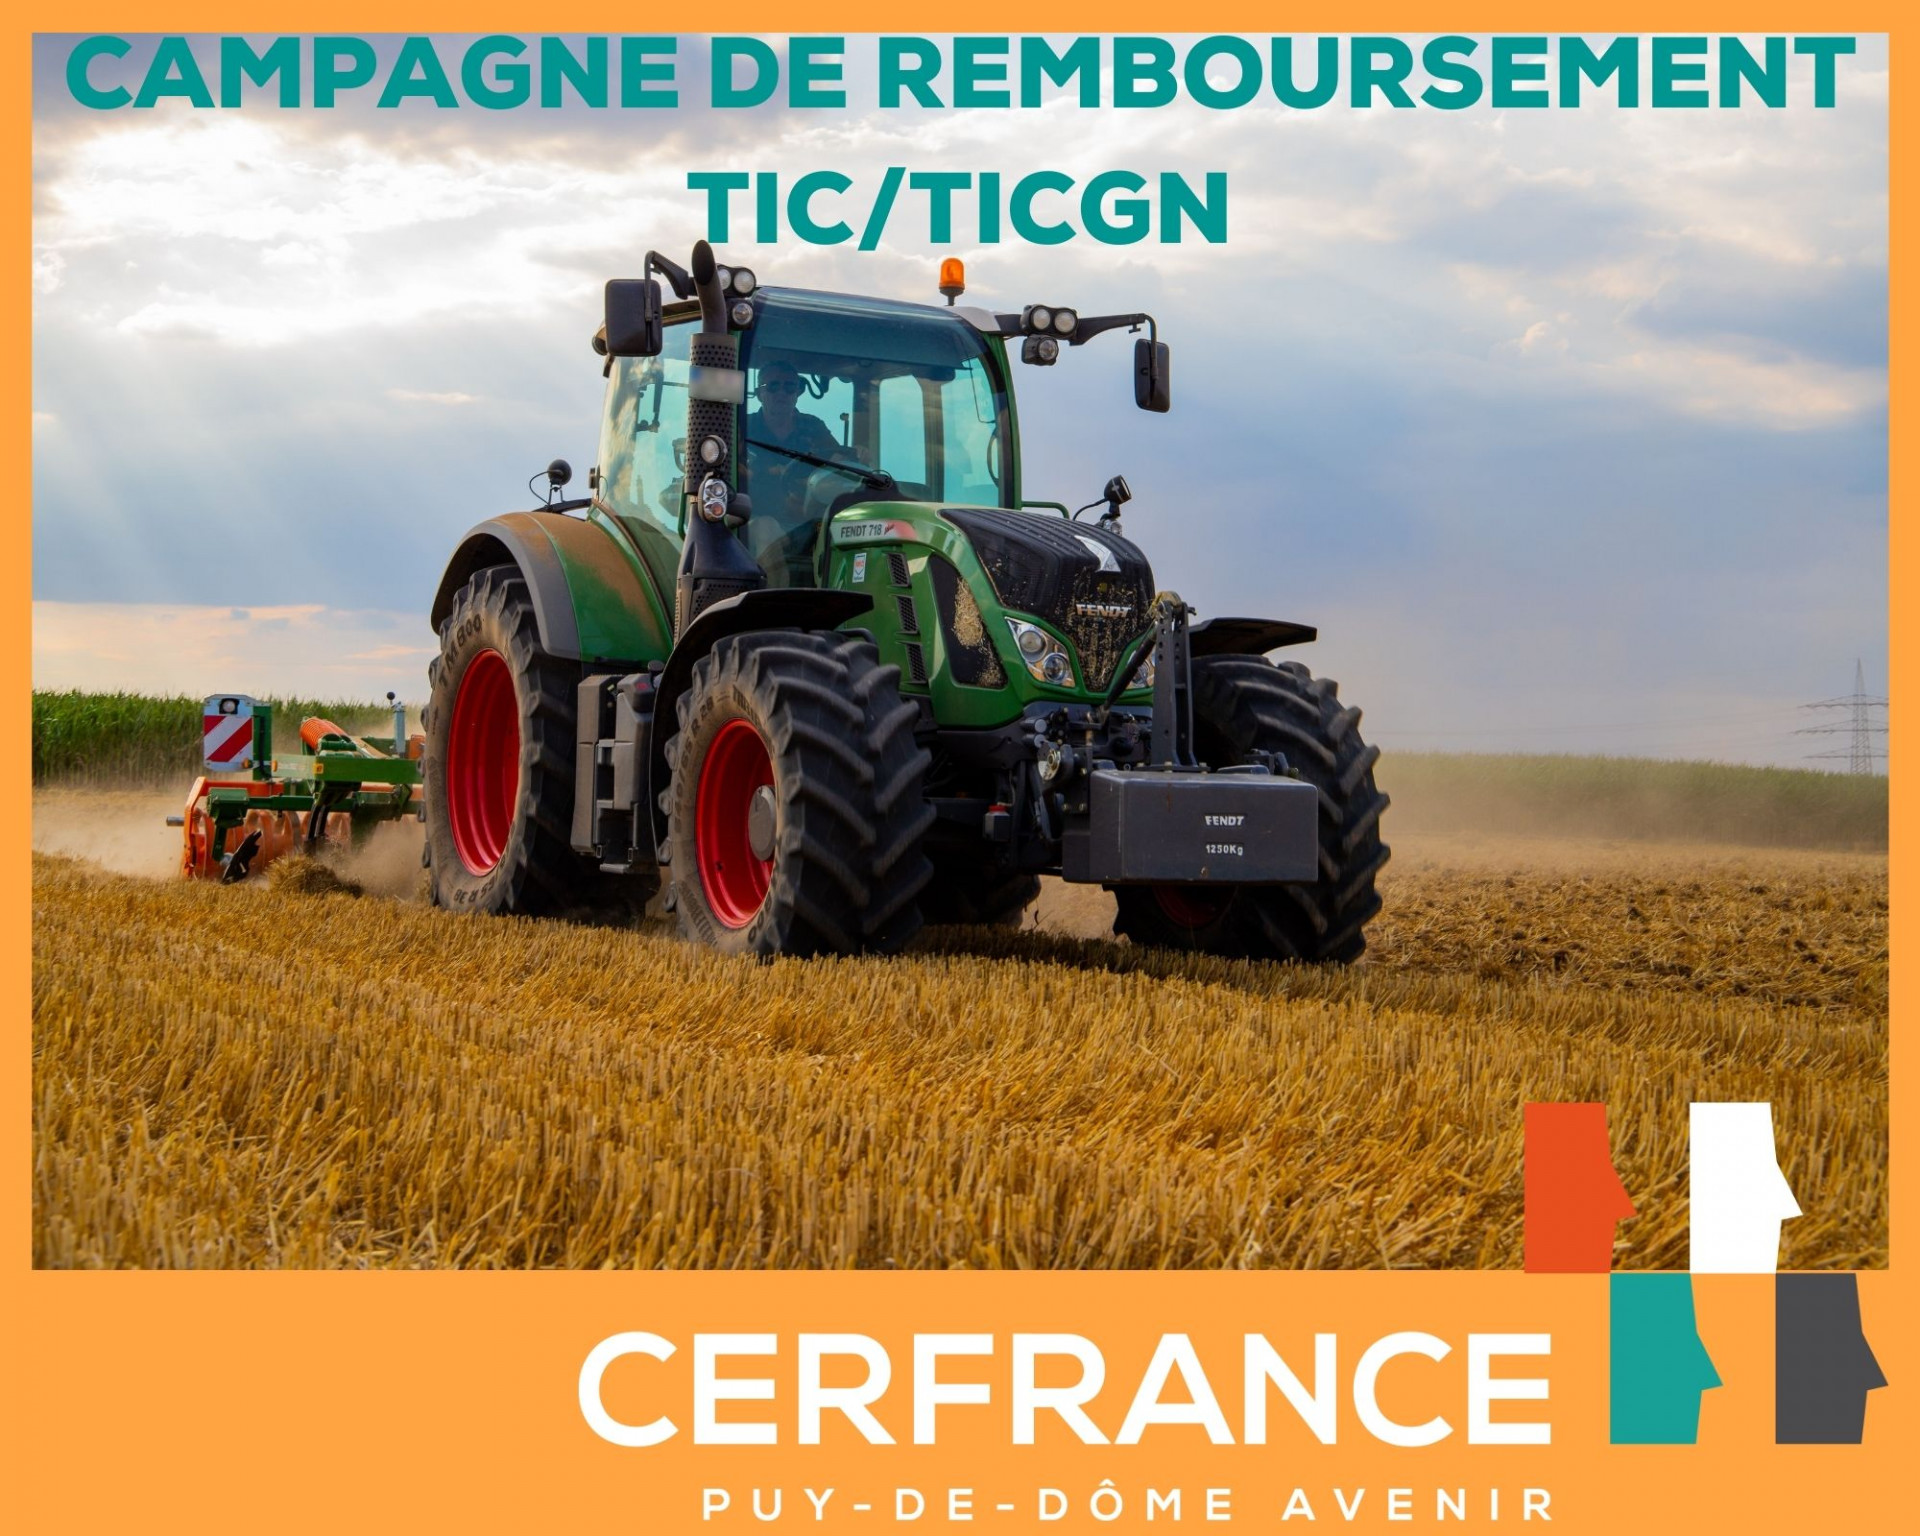 campagne remboursement TIC TICGN